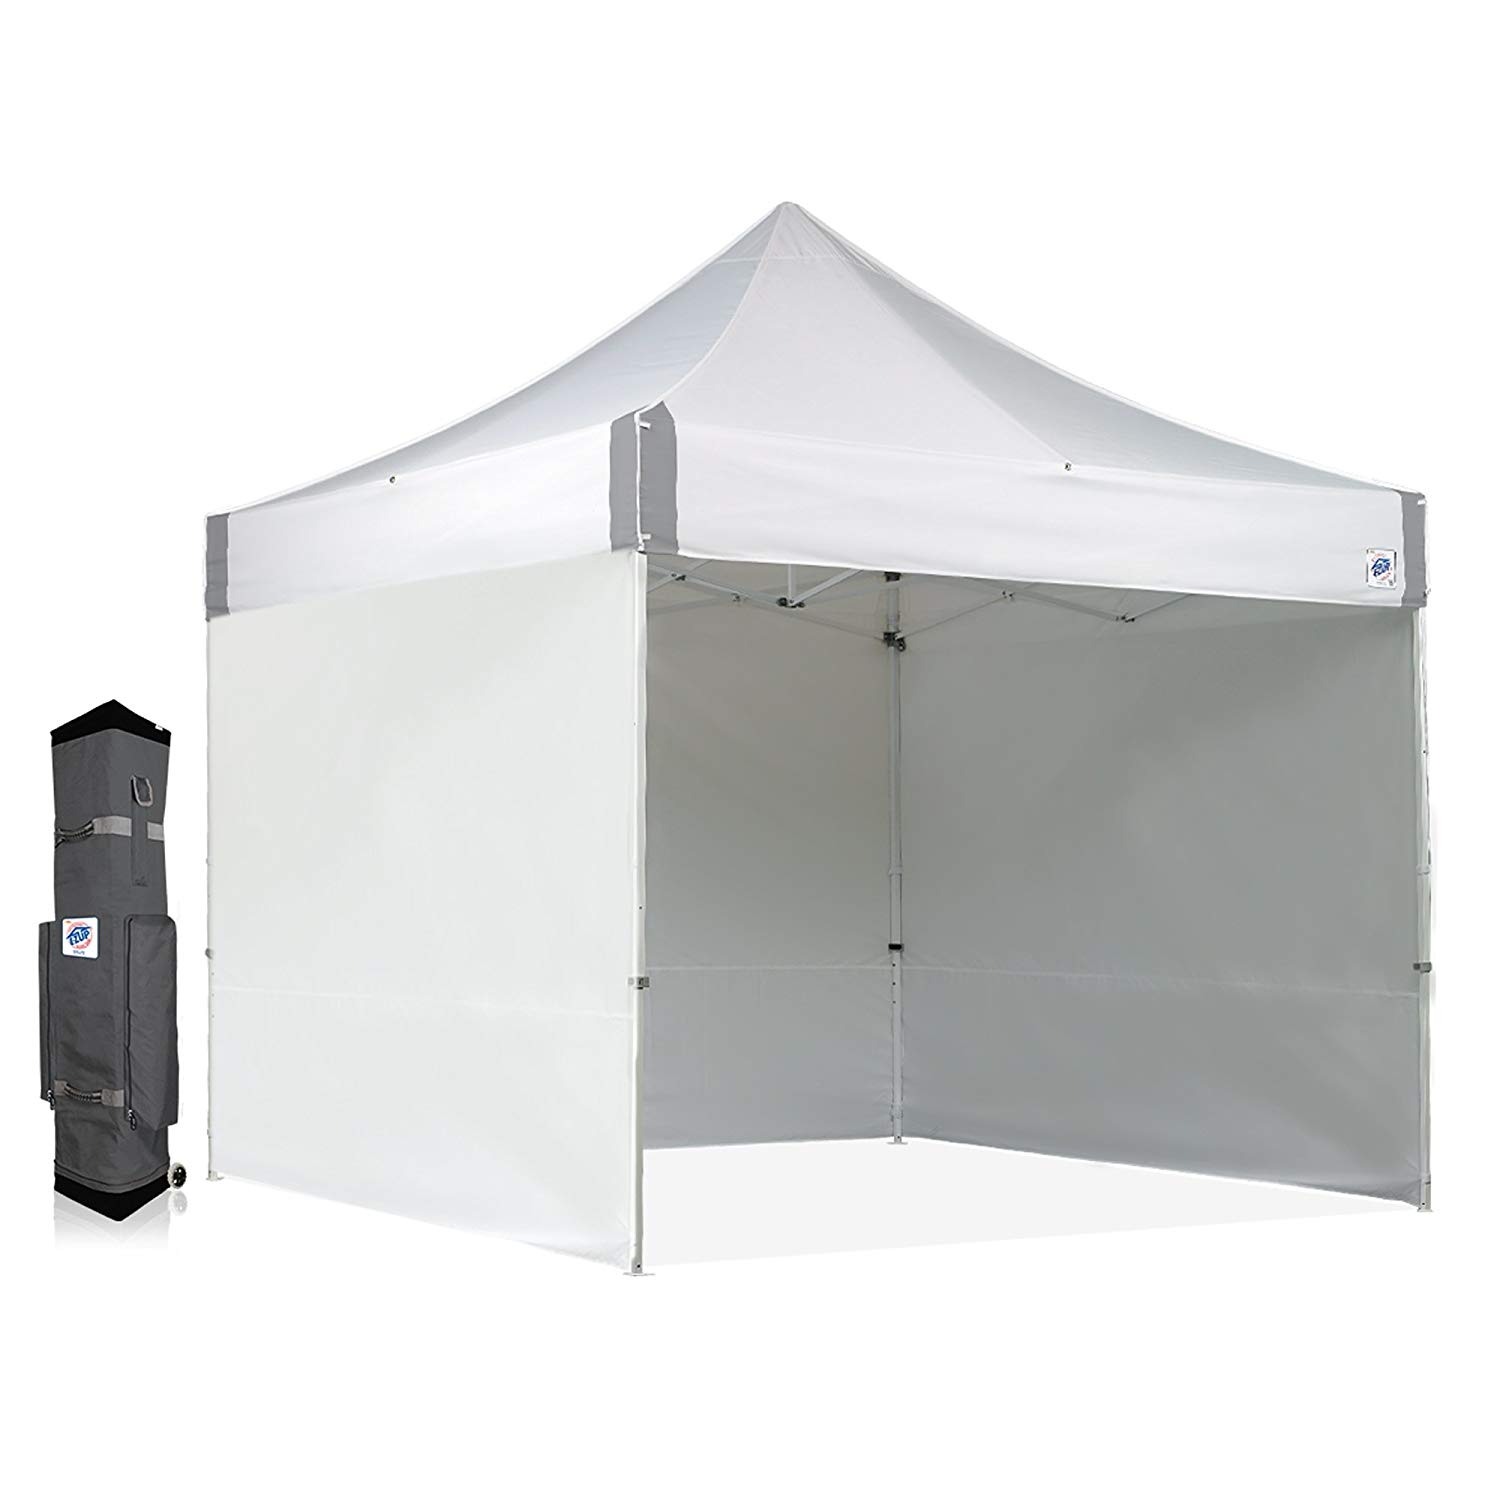 EliteShade 10x10 Commercial Ez Pop Up Canopy Outdoor Instant Canopies Party Tent Sun Shelter with Removable Sidewalls and Heavy Duty Roller Bag,Bonus 4 Weight Bags,White 